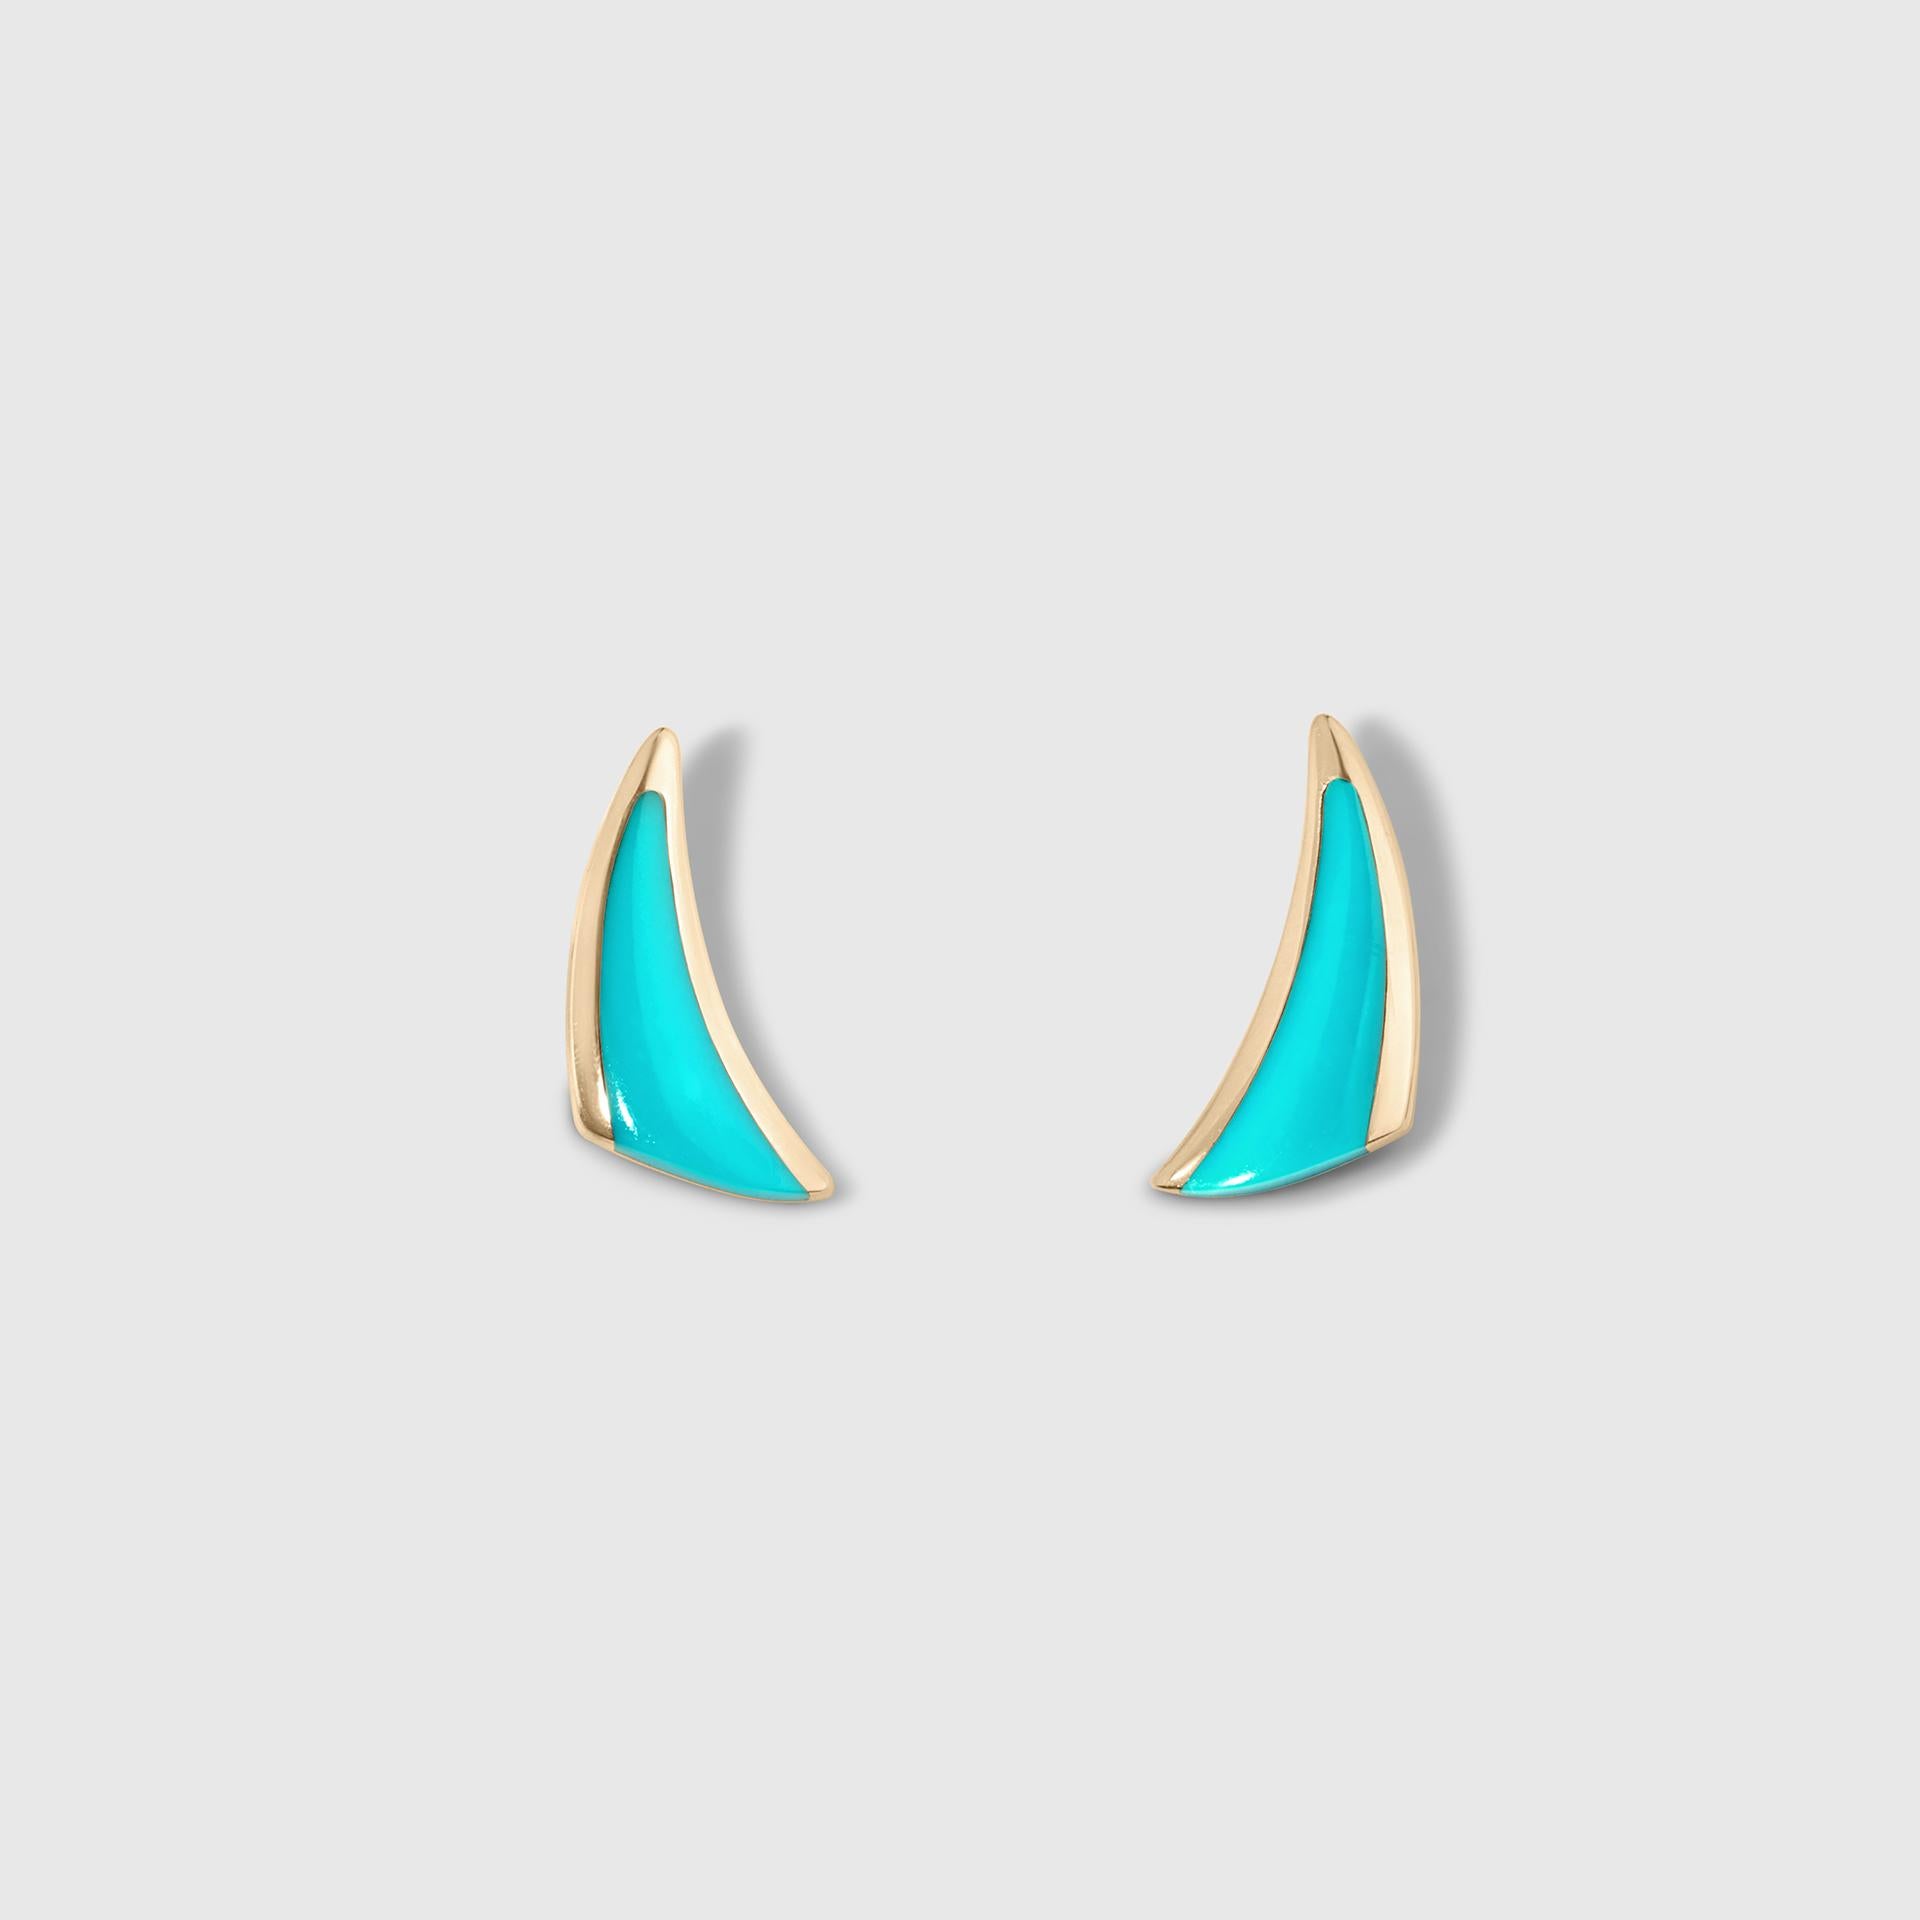 Swoop-Triangle Post Earrings with Sleeping Beauty Turquoise Inlay, 14k Gold, Small, 3/4